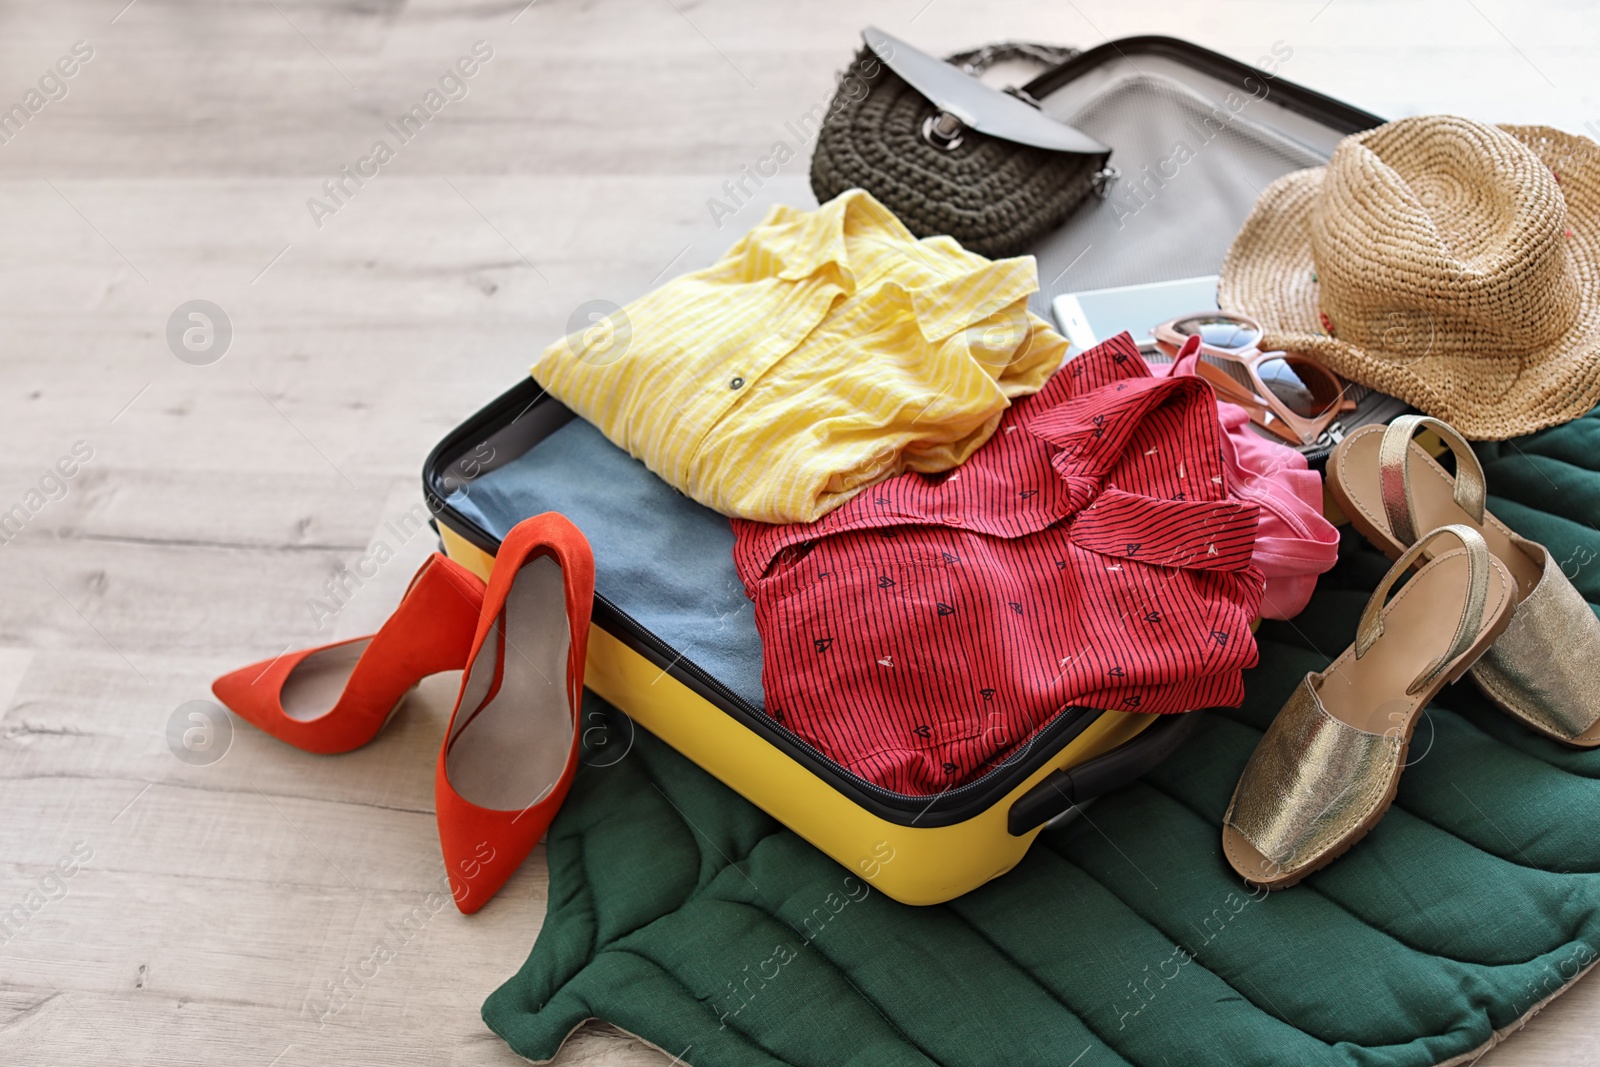 Photo of Open suitcase with clothes and accessories on floor